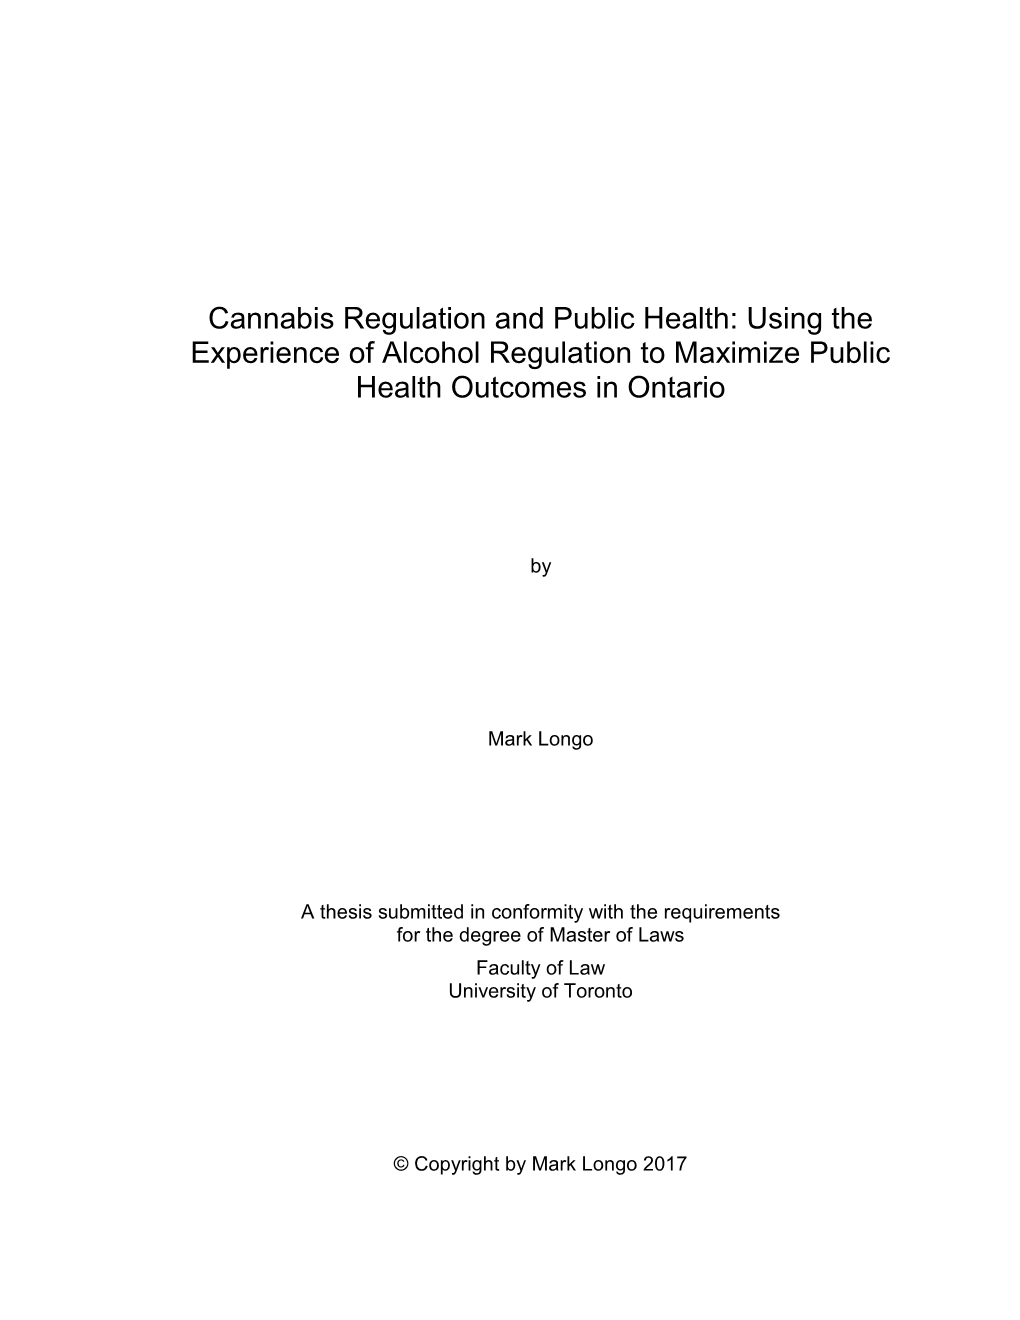 Cannabis Regulation and Public Health: Using the Experience of Alcohol Regulation to Maximize Public Health Outcomes in Ontario